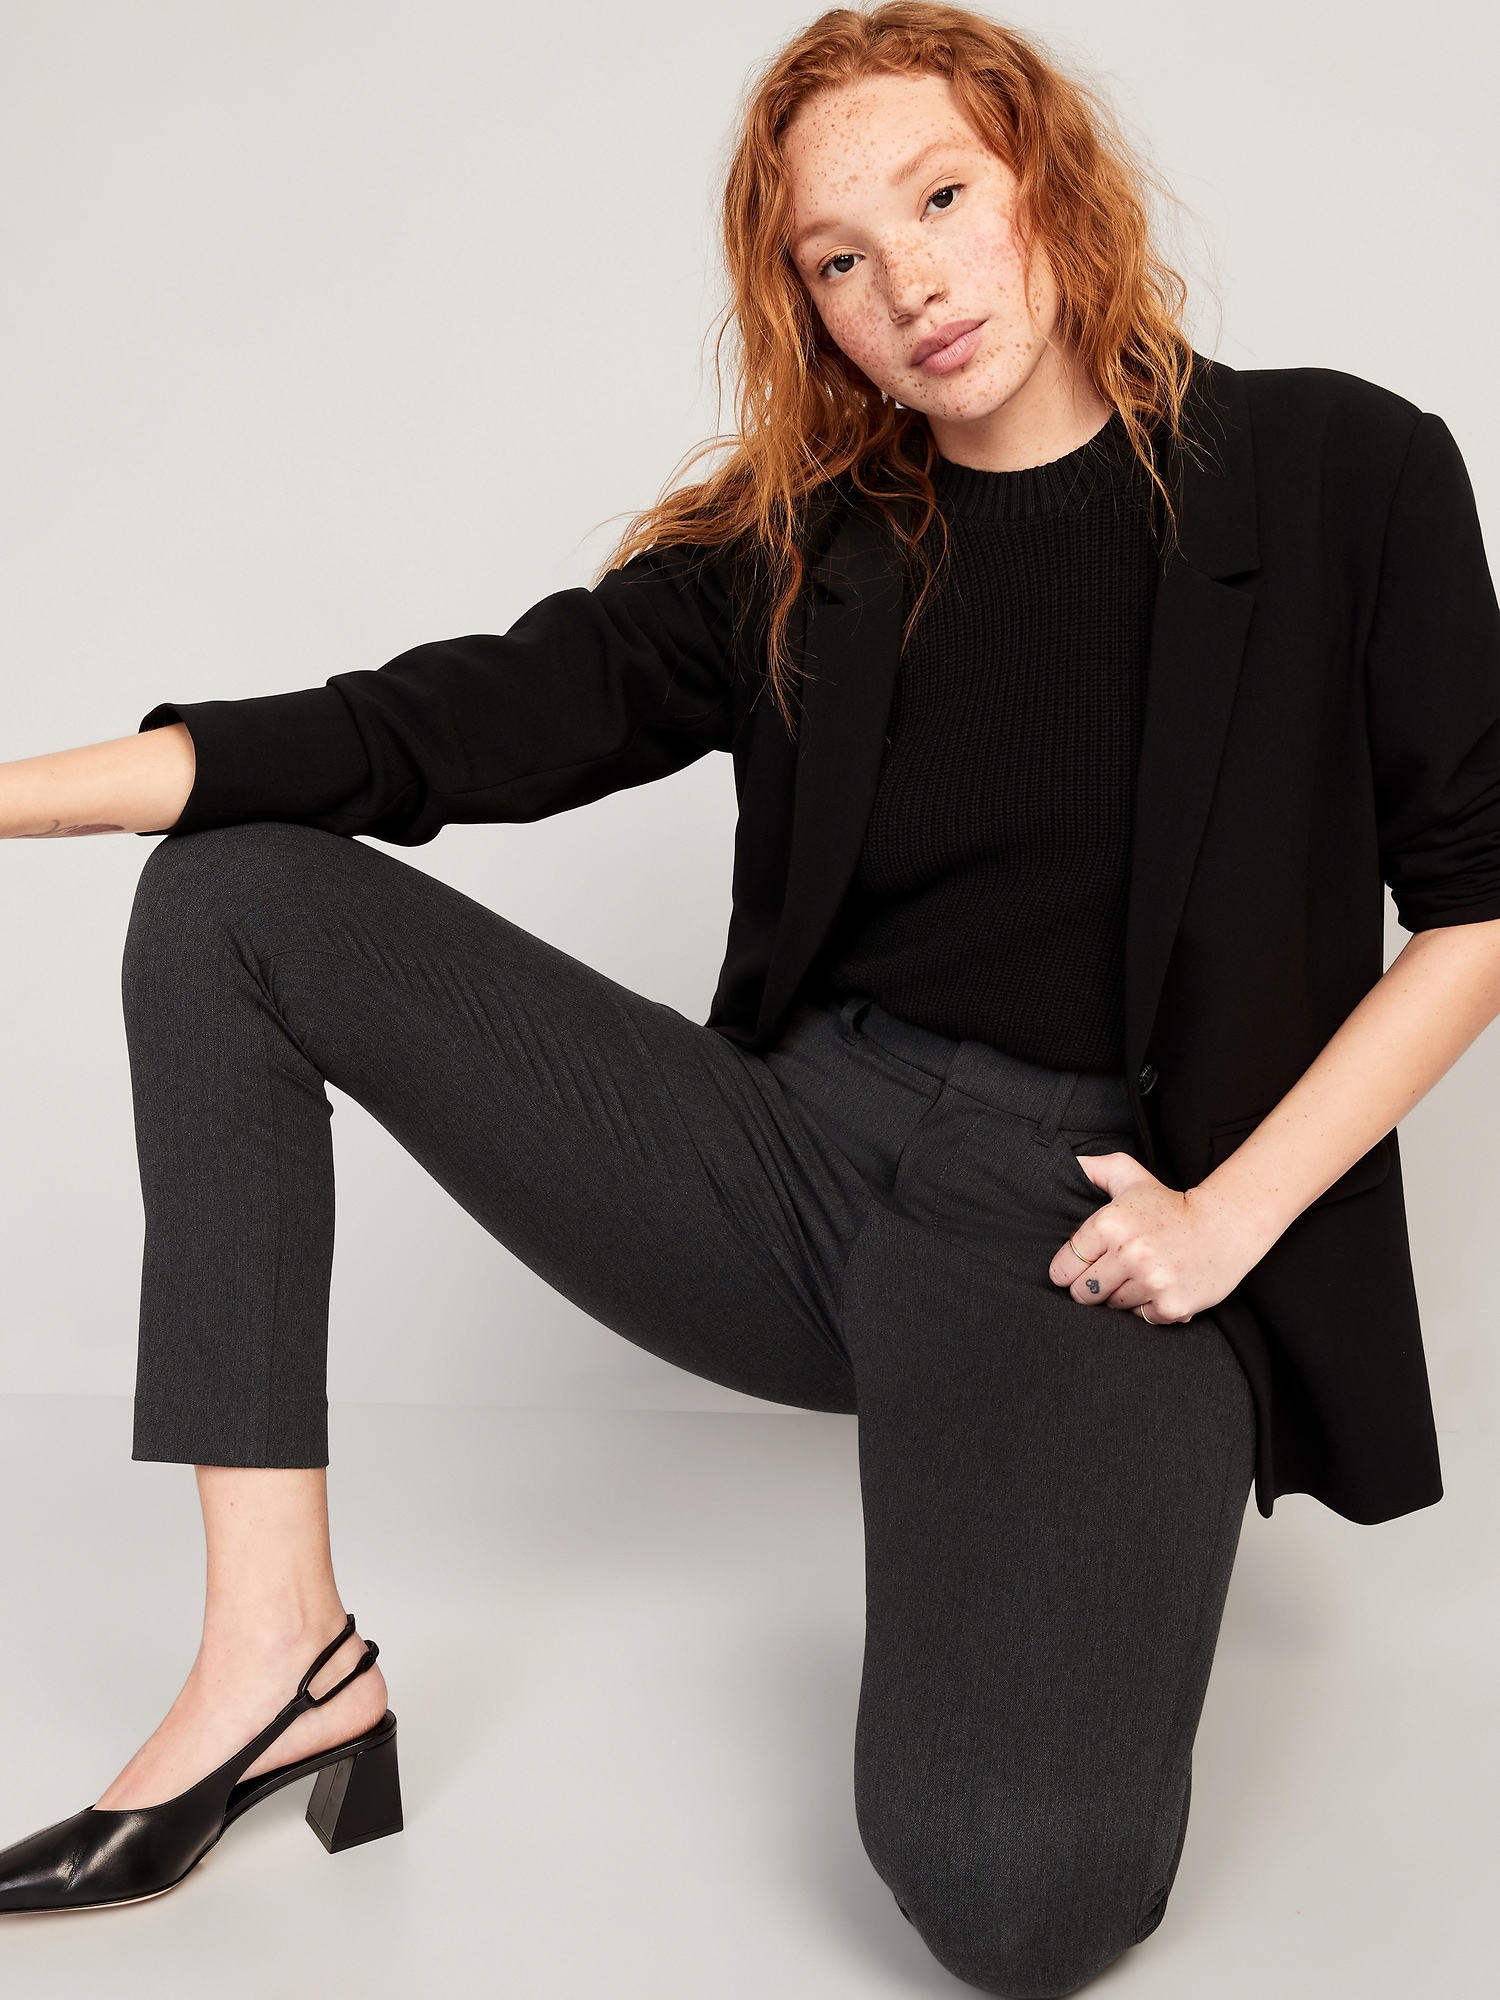 Ginasy Black Dress Pants for Women Business Casual India | Ubuy